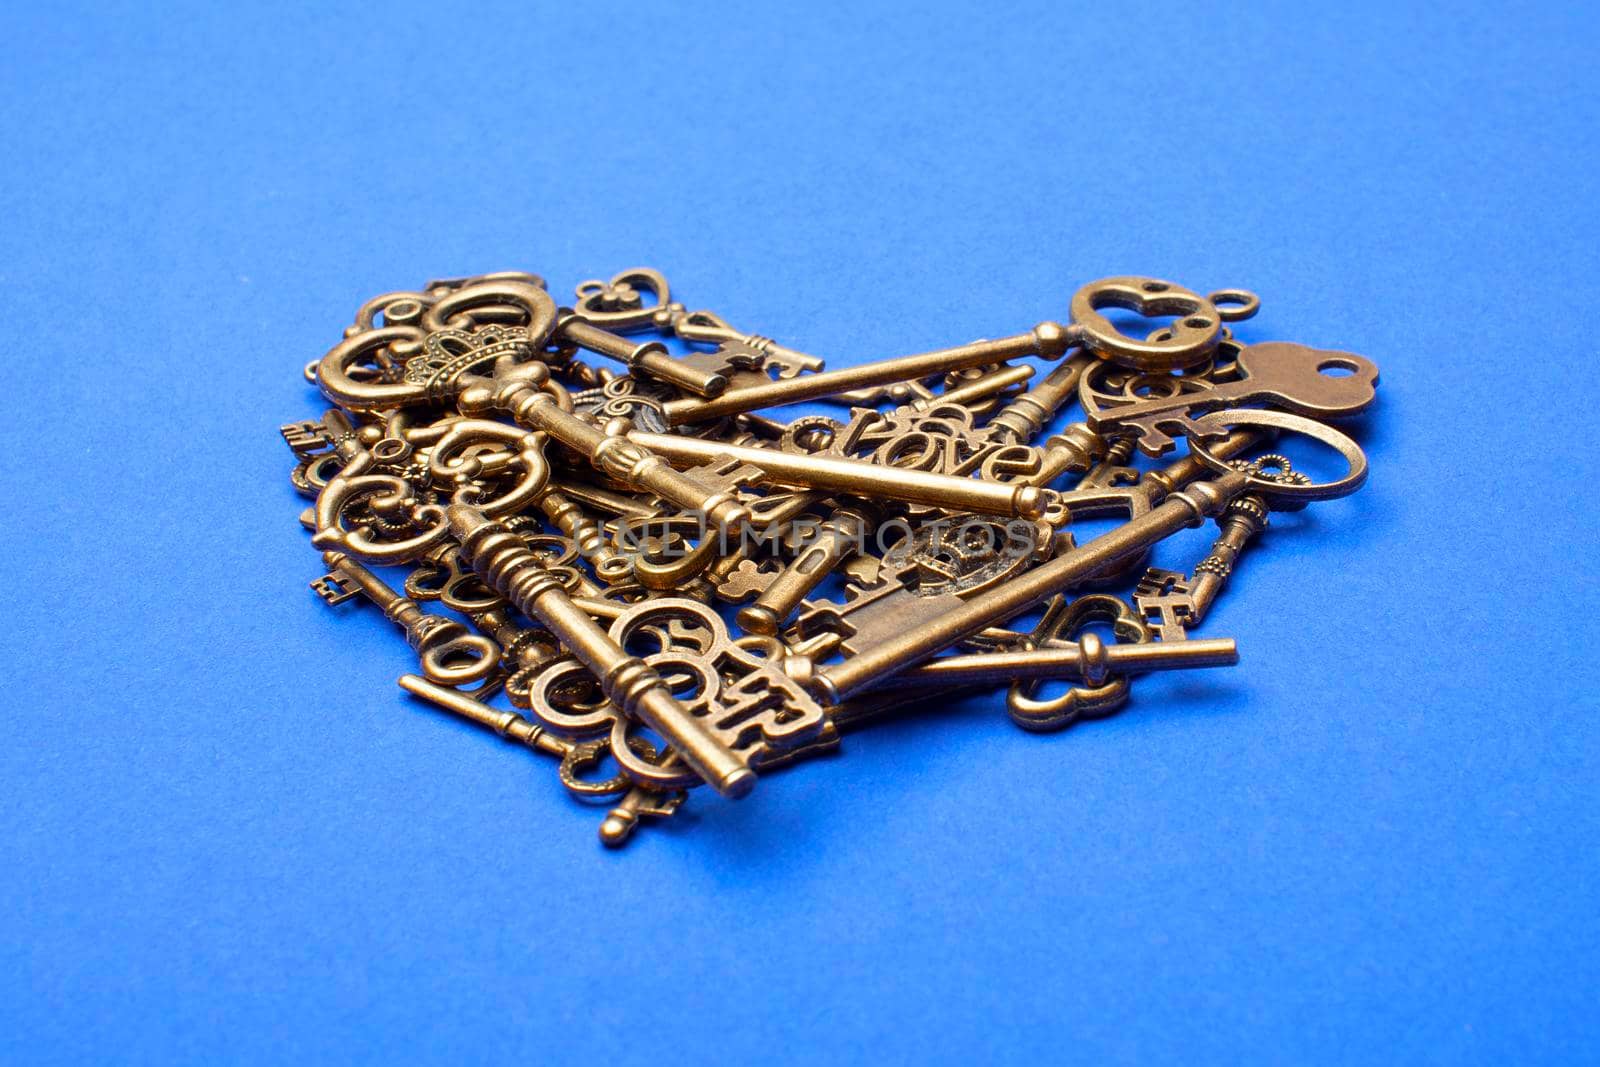 Old, vintage keys in the shape of a heart isolated on blue bacground